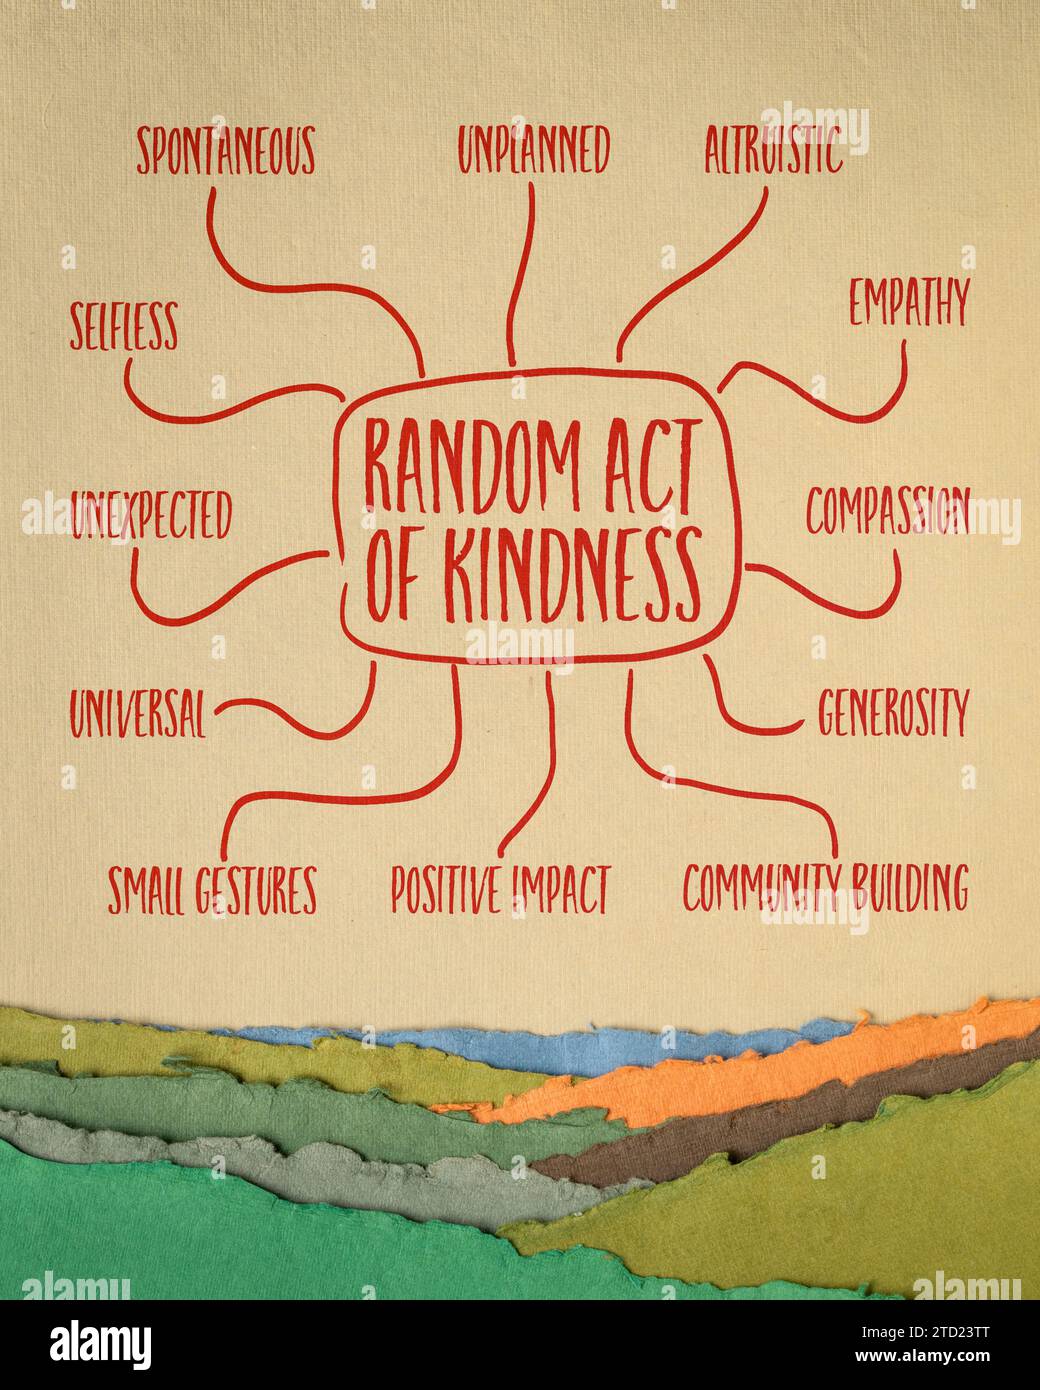 random act of kindness - infographics or mind map sketch on art paper, spontaneous compassion concept Stock Photo